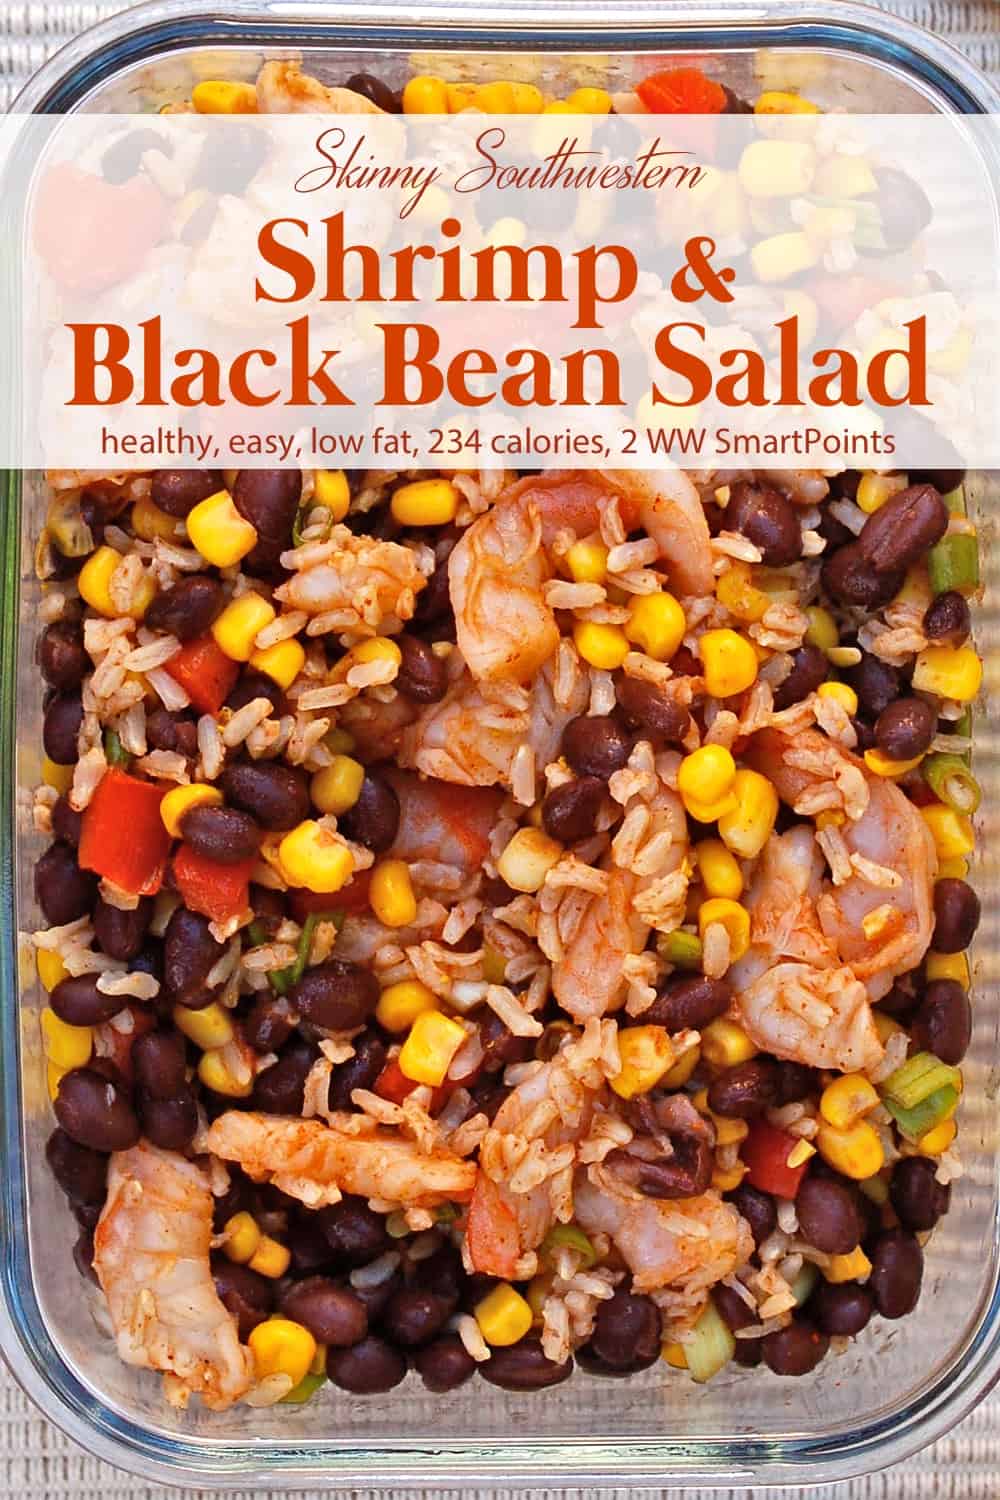 Zest shrimp salad with black beans, corn and brown rice up close.